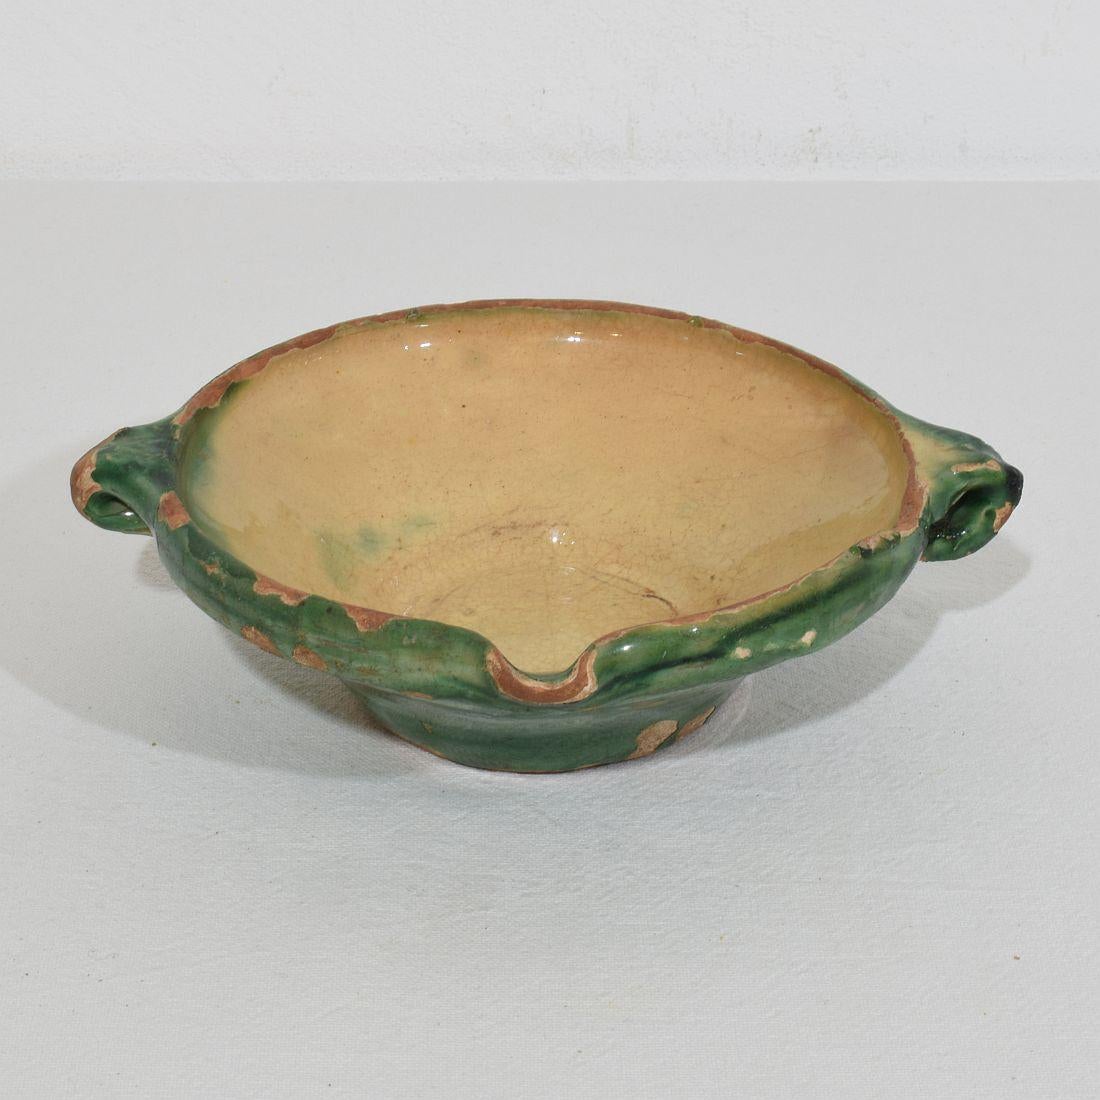 French Provincial Very Small 19th Century French Green Yellow Glazed Terracotta Bowl or Tian For Sale